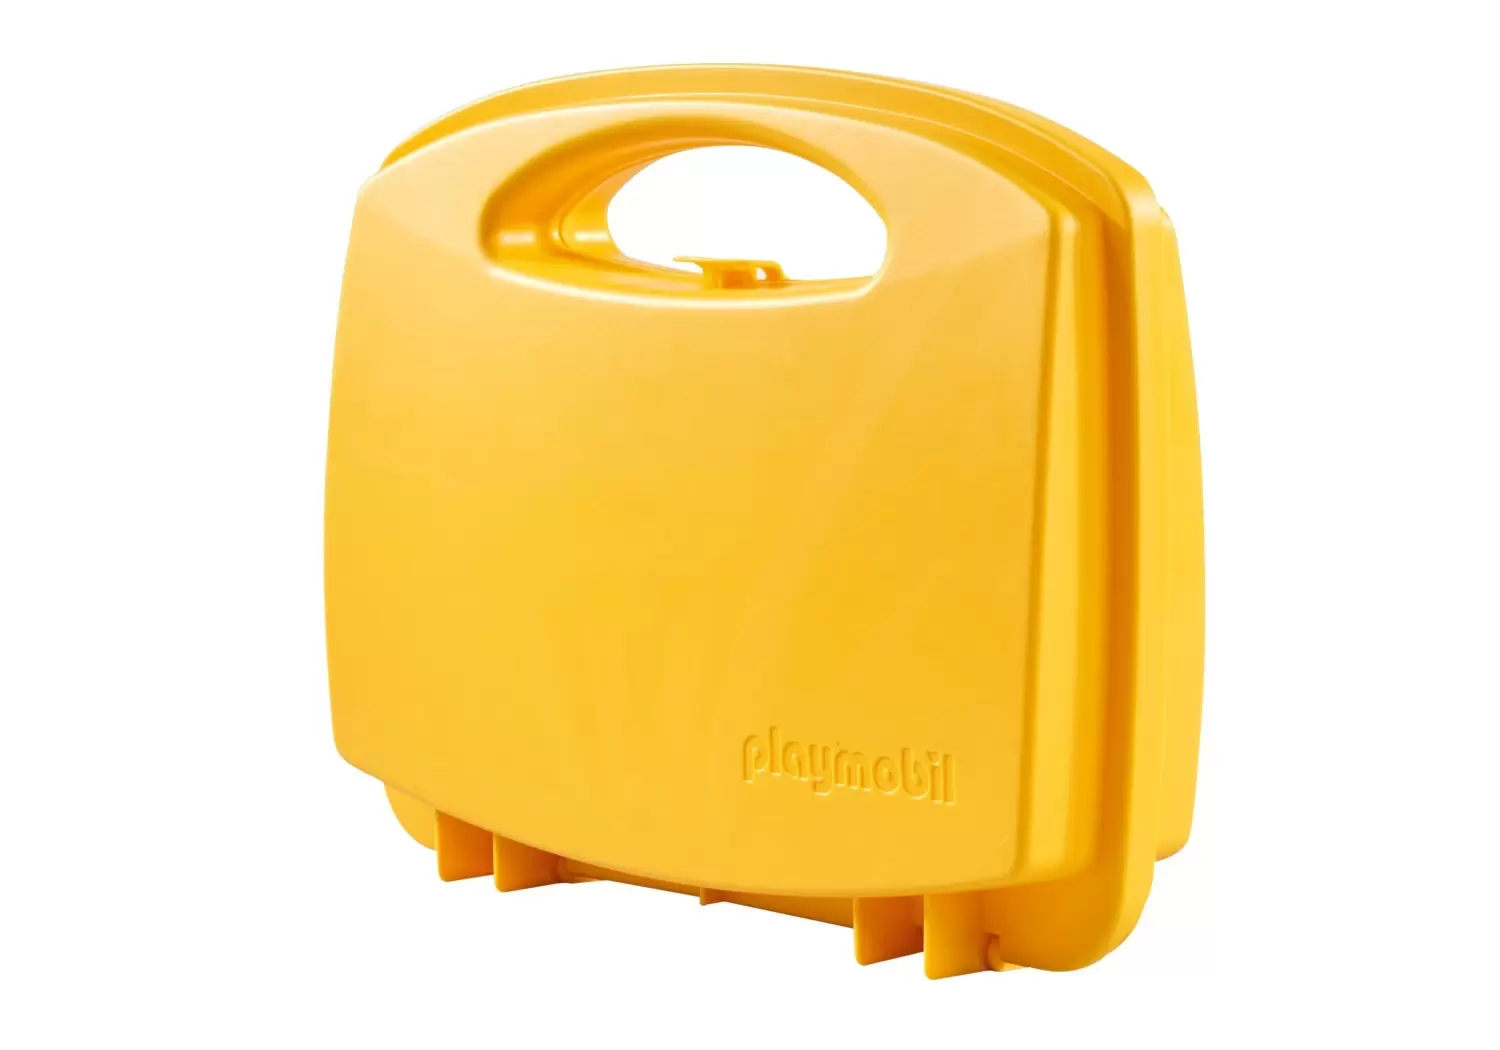 Playmobil Accessories & decorations - Yellow Suitcase